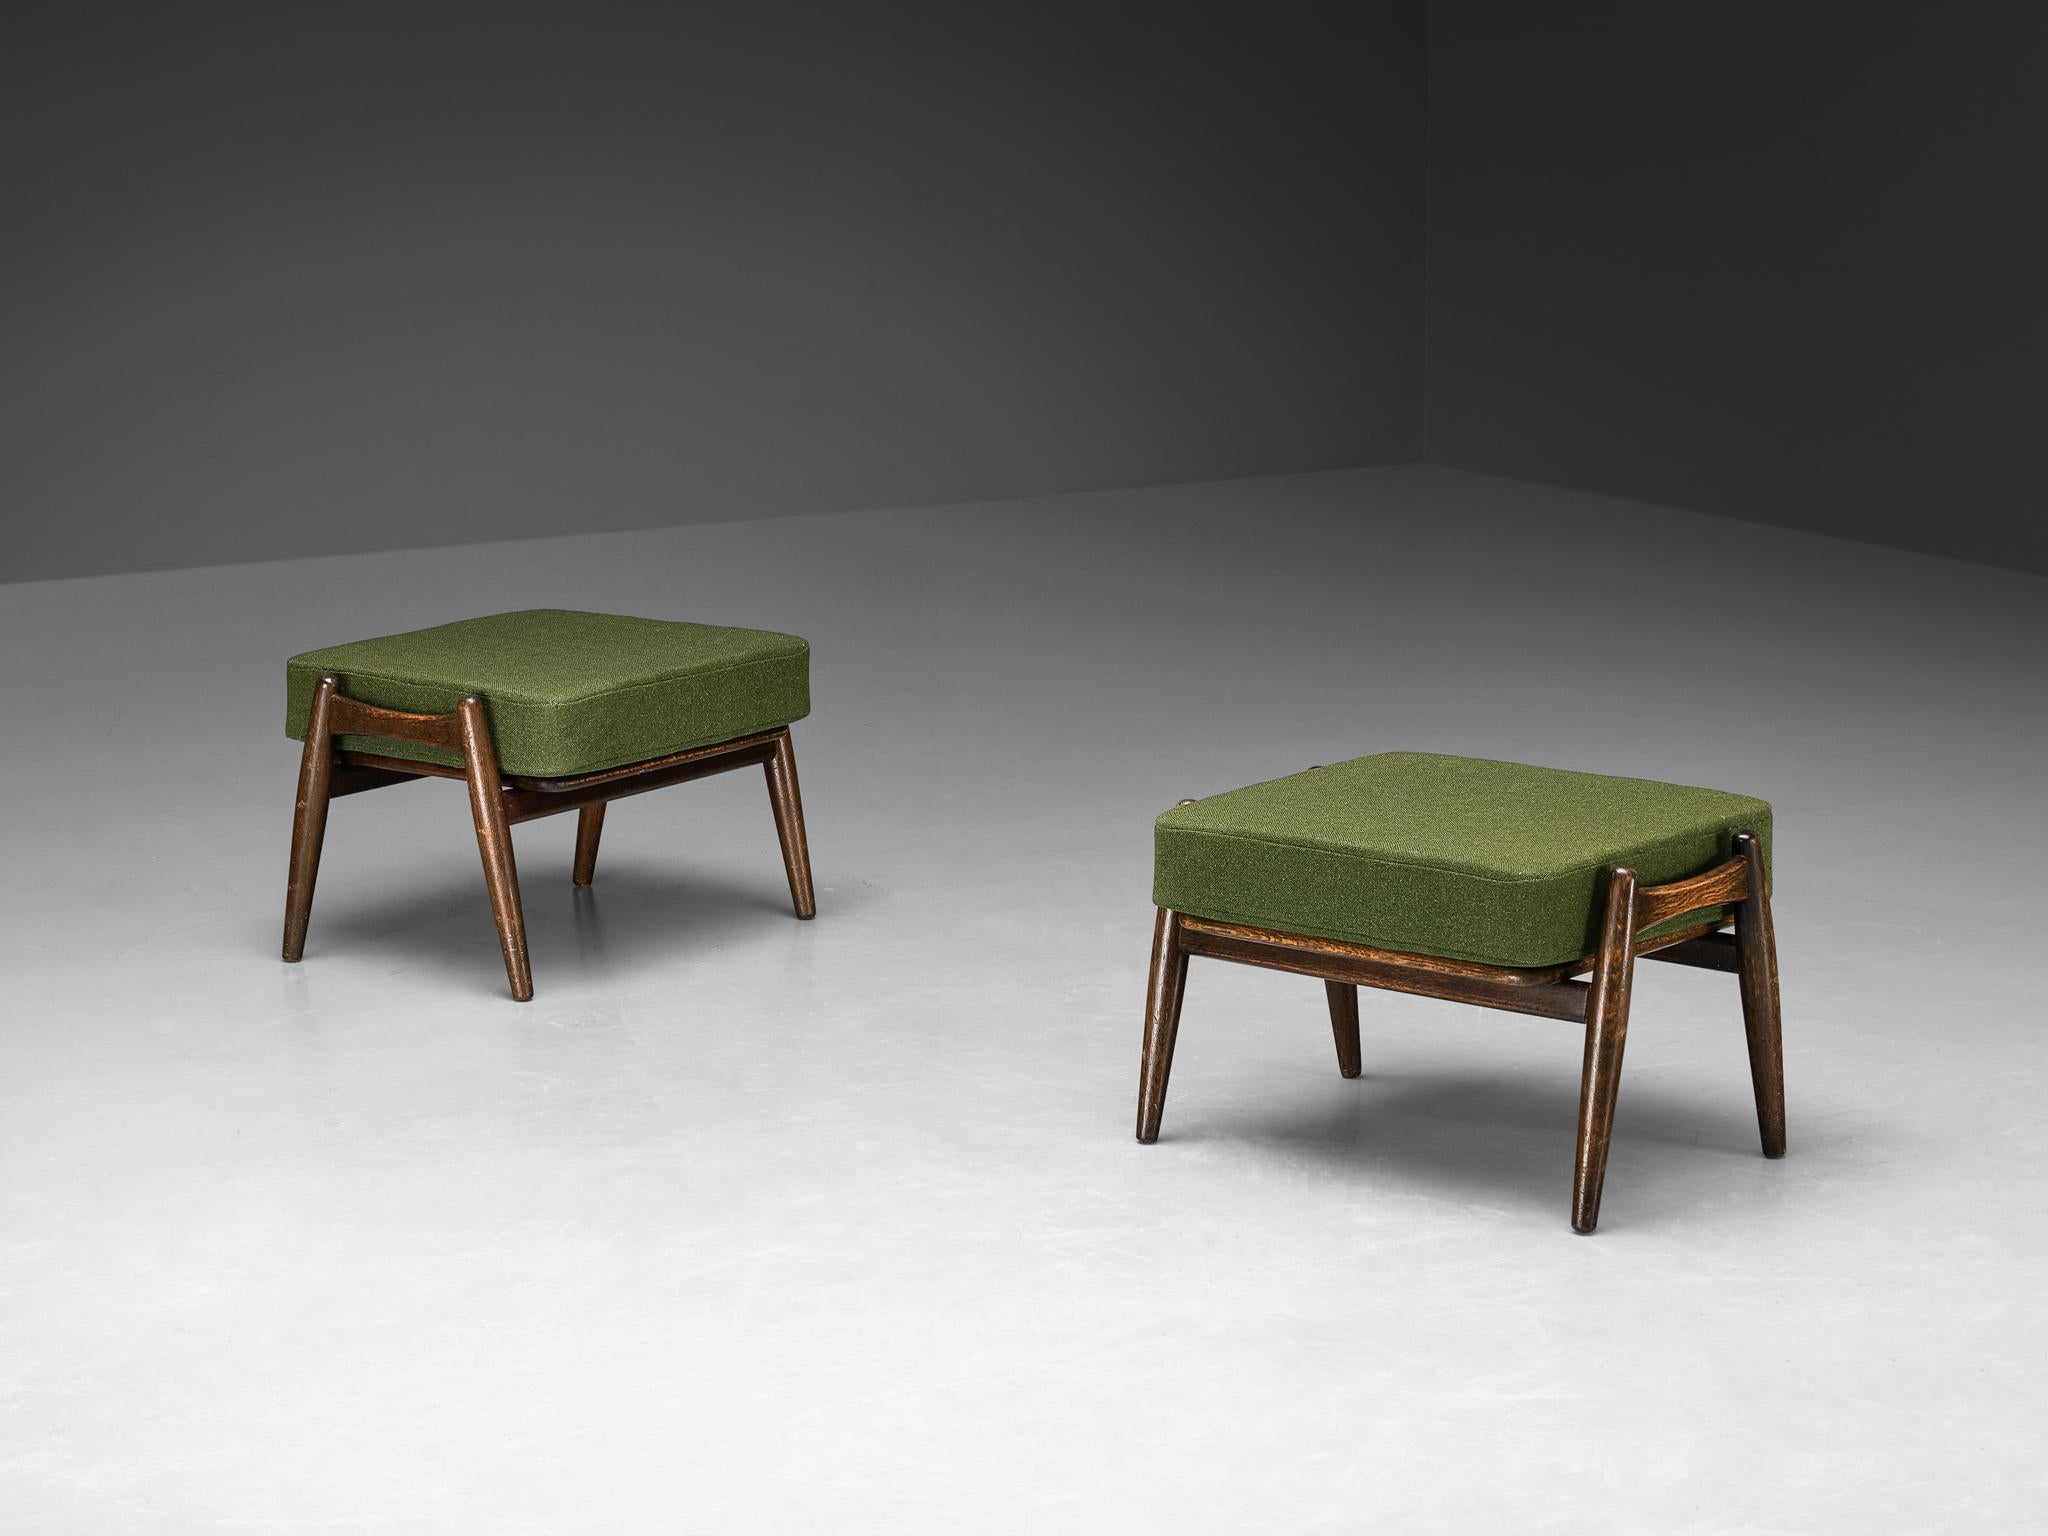 Hans J. Wegner for Getama, 'Cigar' ottomans or stools, model 'GE240S', oak, fabric, Denmark, design 1955

Designed in 1955, this Cigar ottoman is a creation by Danish master Hans J. Wegner for Getama. Simple in its form, this design features an open